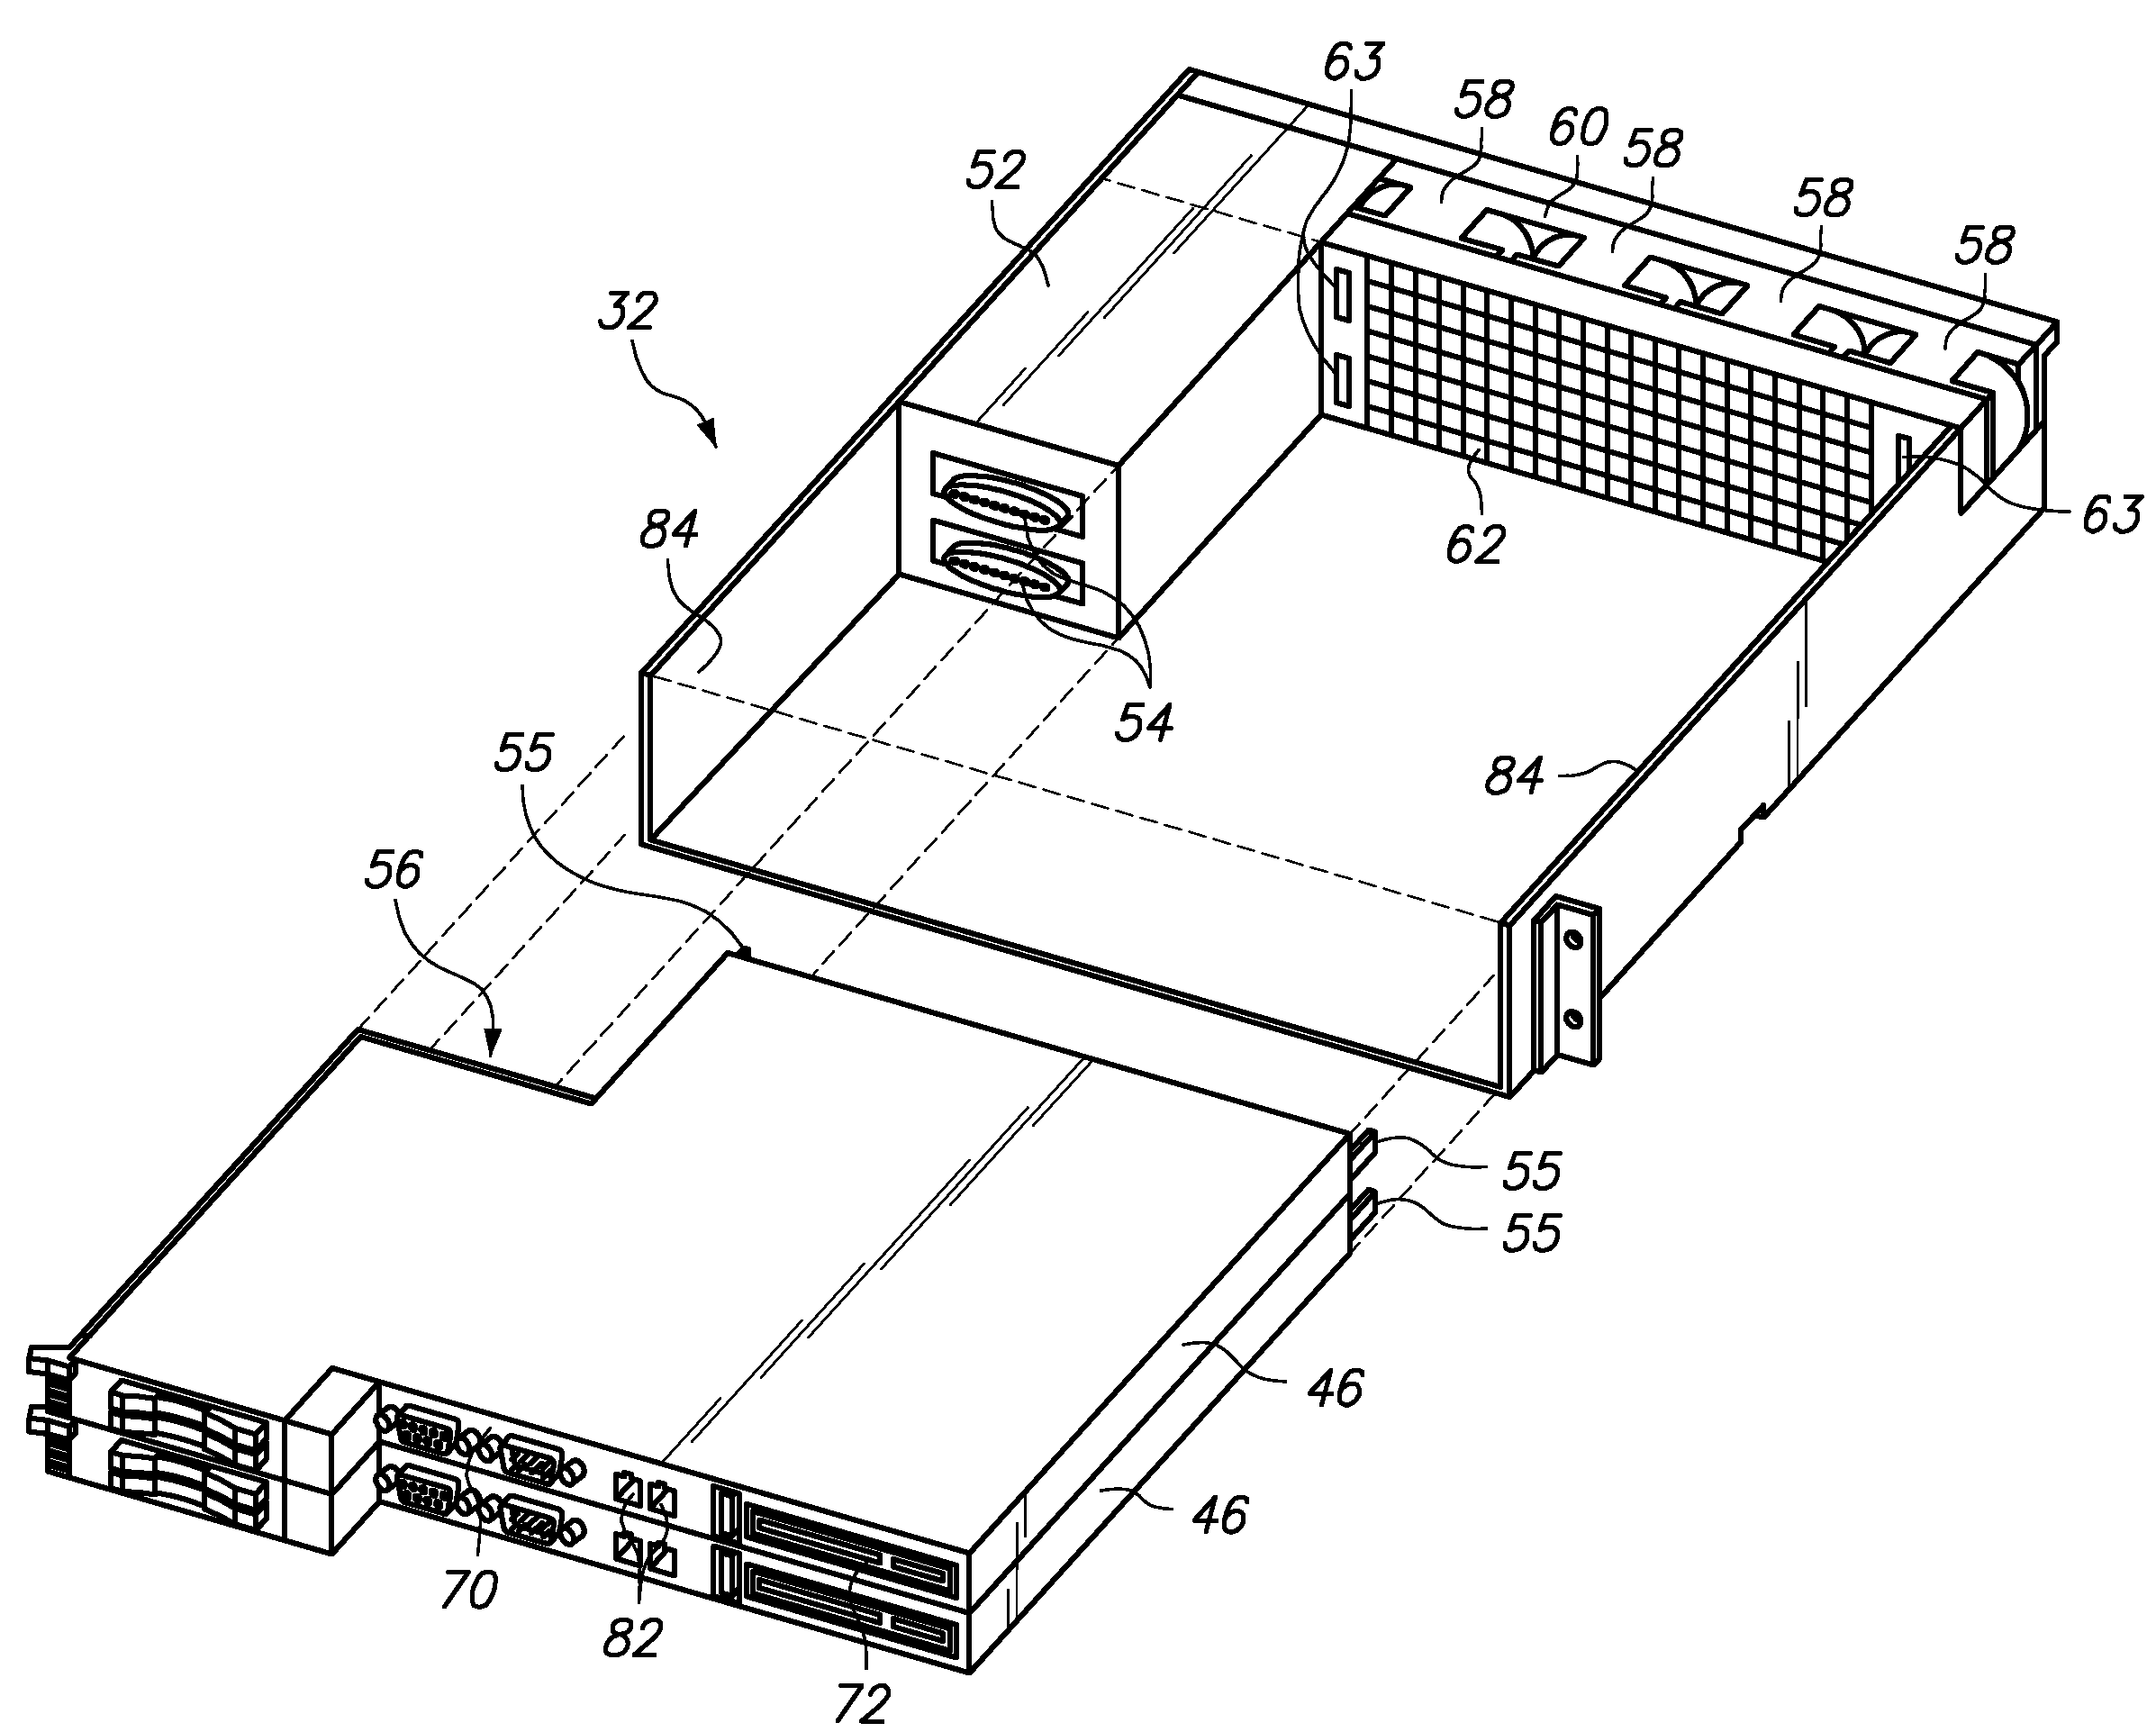 Variable position dampers for controlling air flow to multiple modules in a common chassis